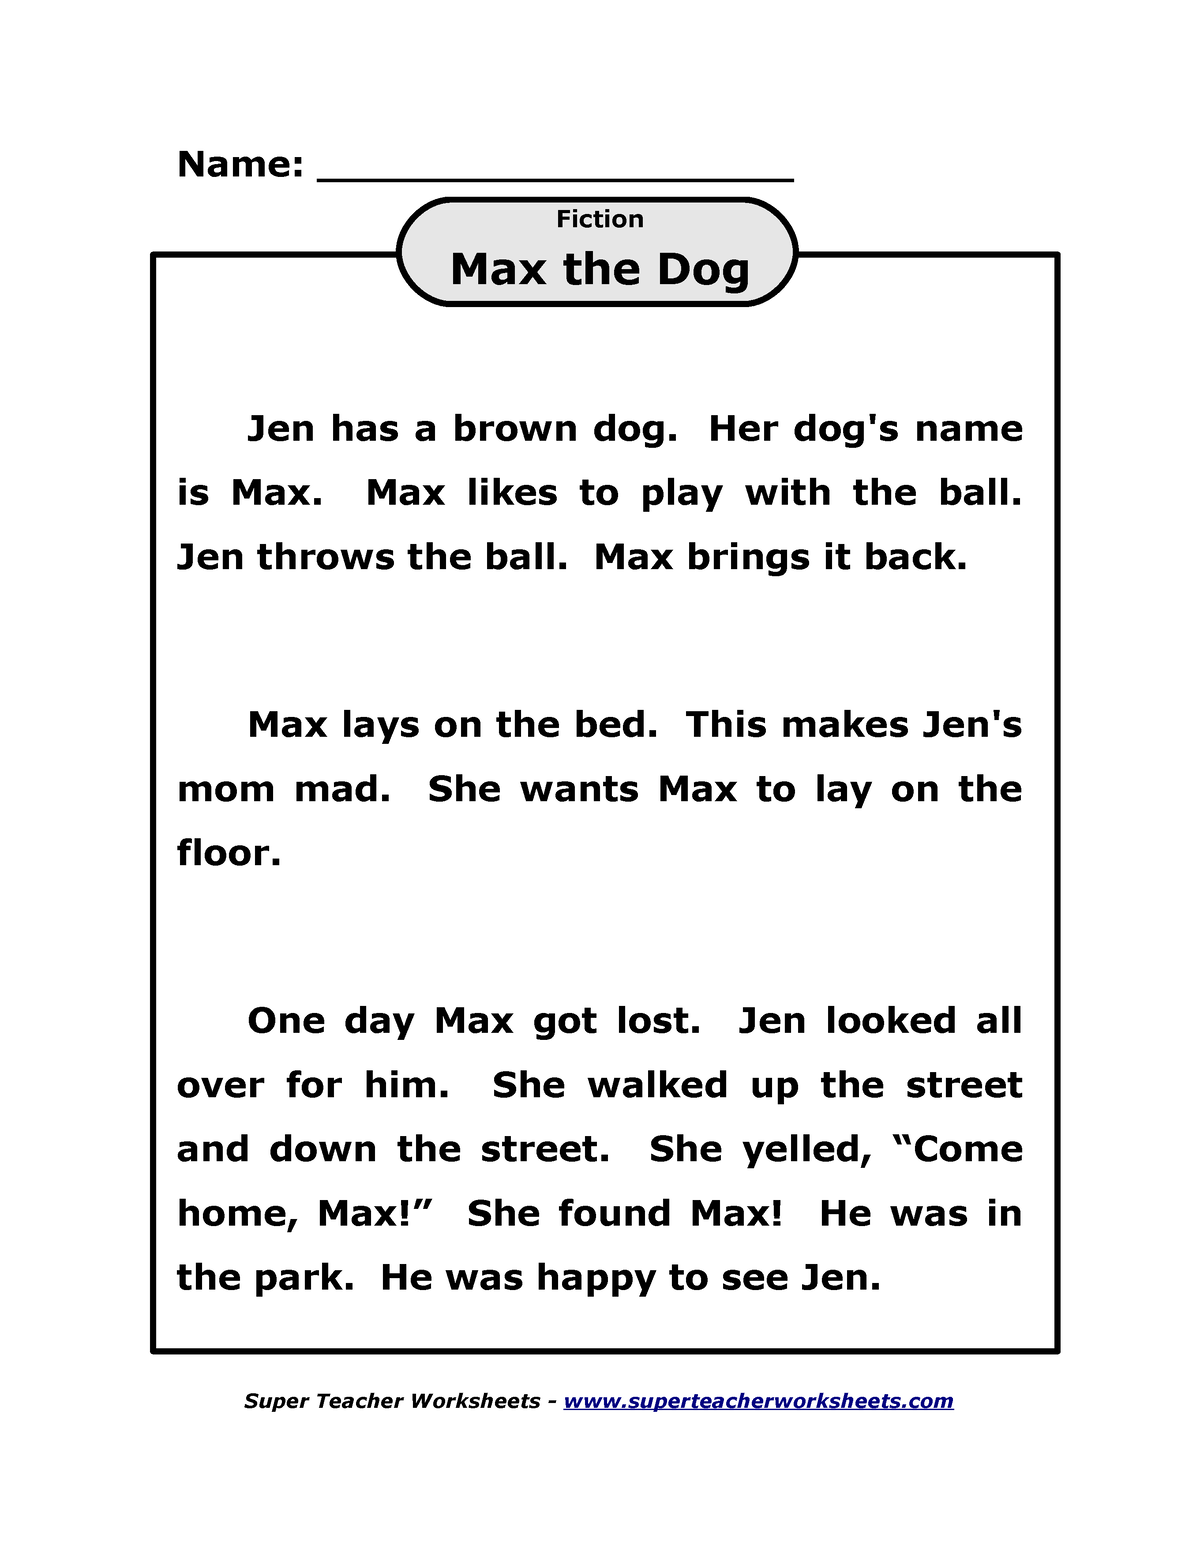 1st max the dog - As an assessment tool, worksheets can be used by ...